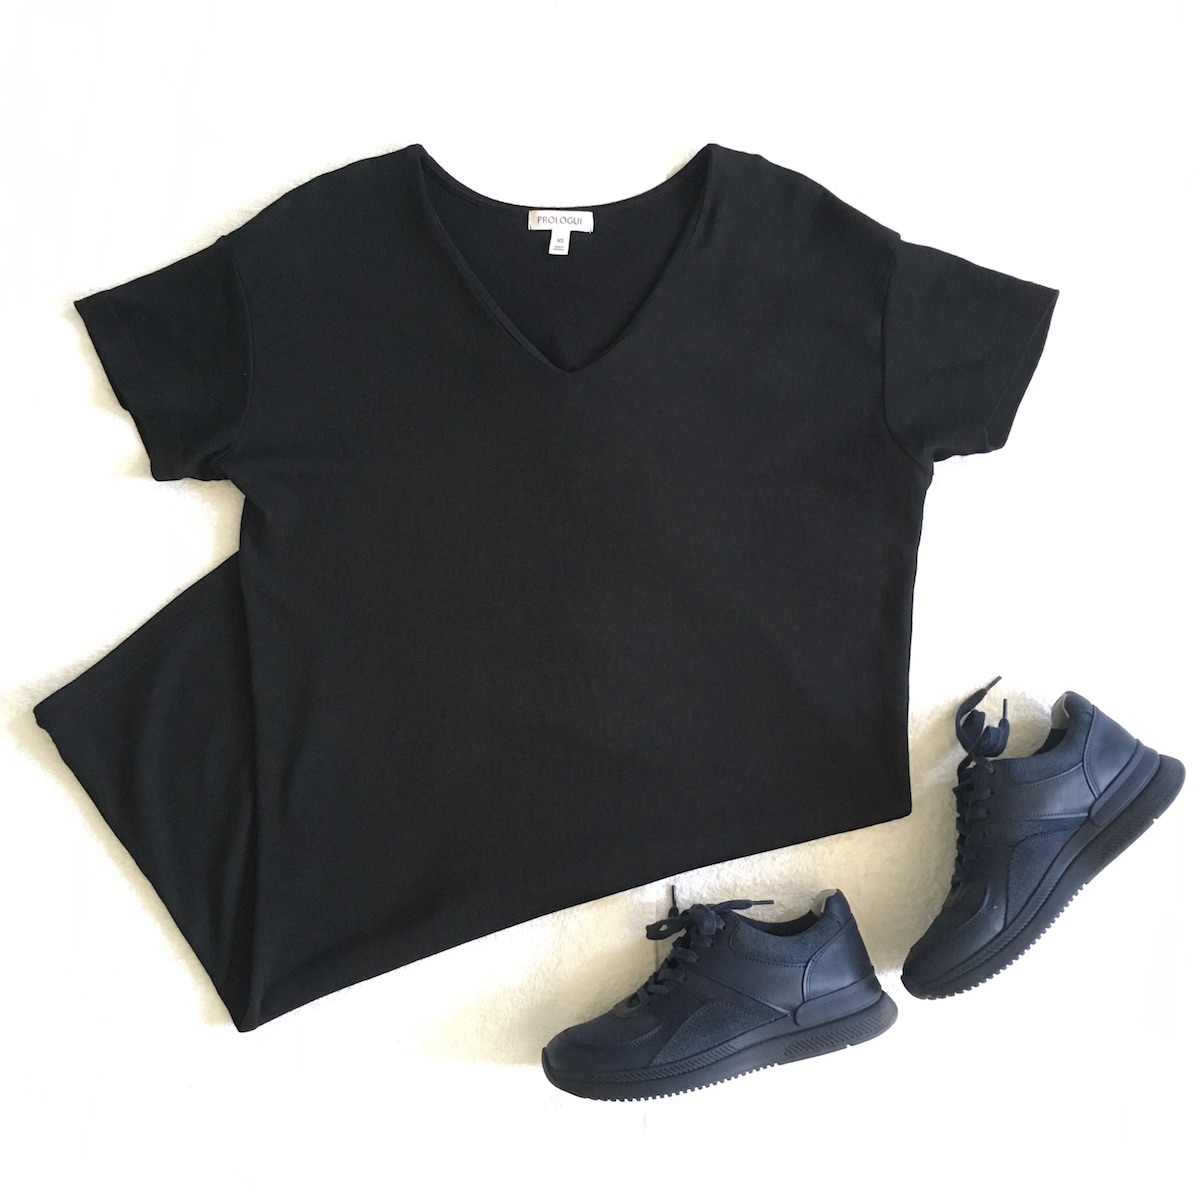 Welcome Objects Shopping Diary: Flat lay image of a black T-shirt dress from Target's Prologue brand and Everlane trainers.